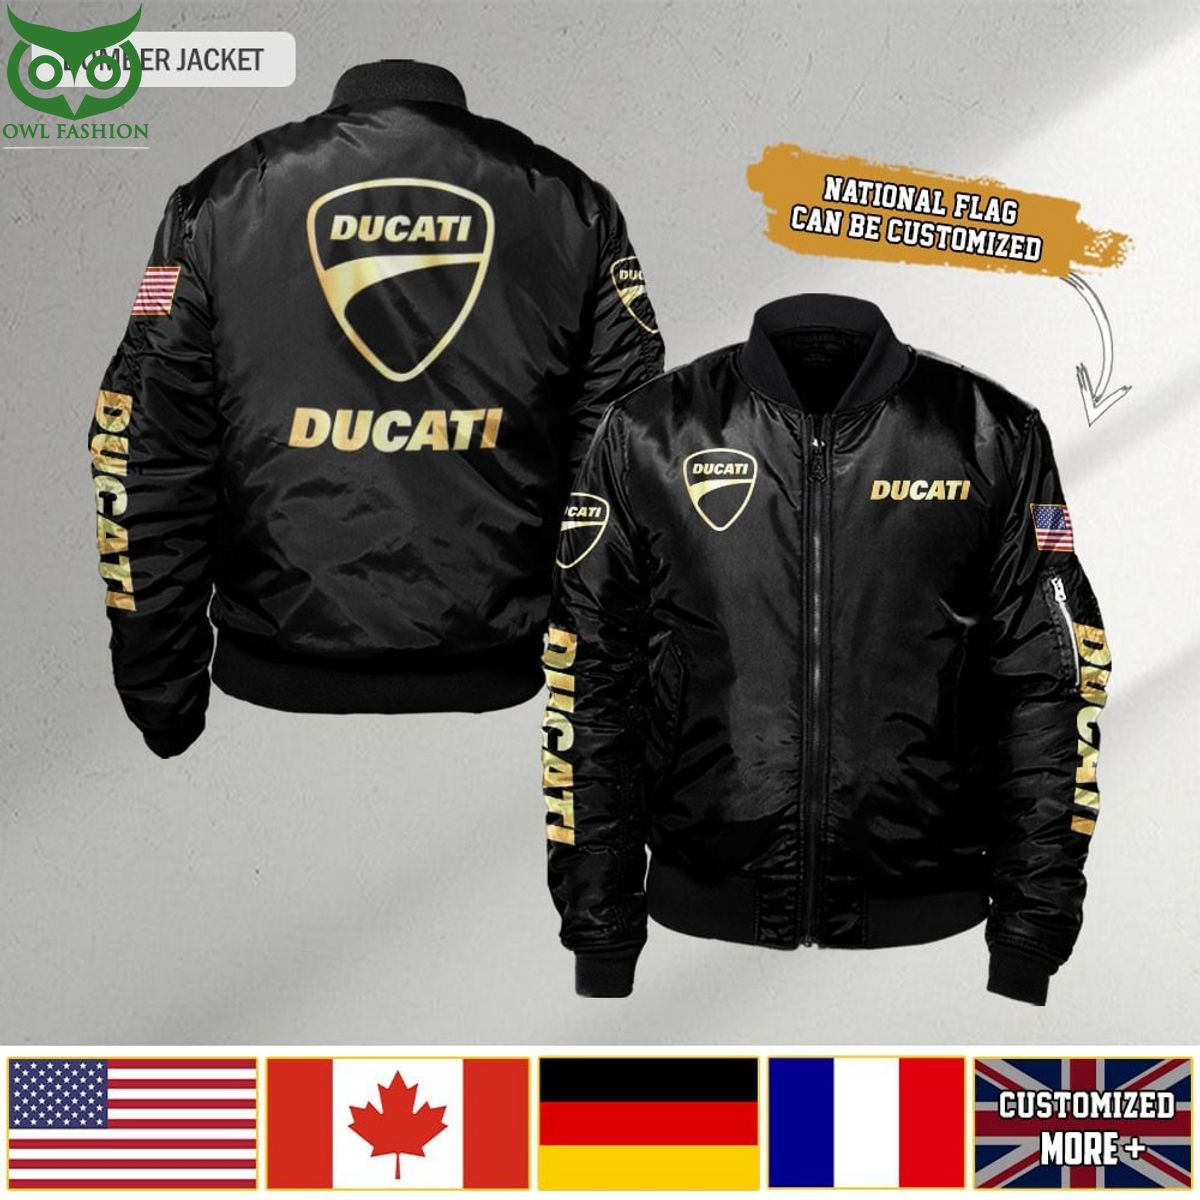 Ducatti Custom Flag 3D Bomber Jacket Your beauty is irresistible.